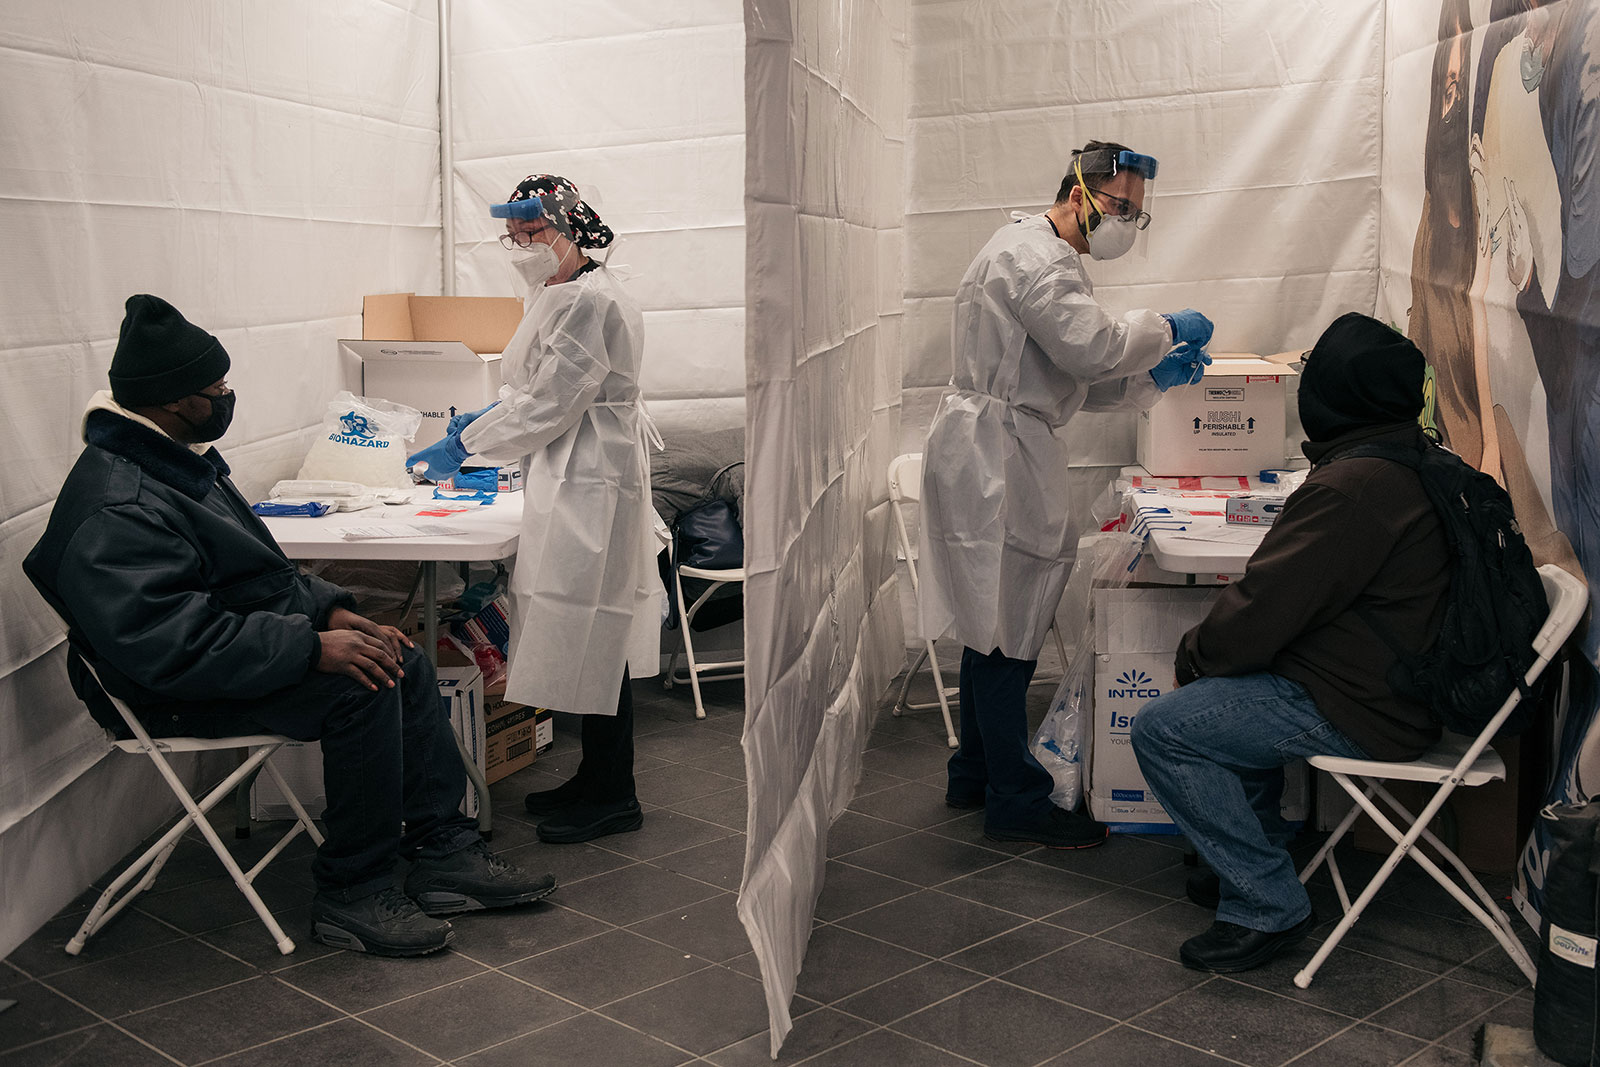 Medical workers administer Covid-19 tests at a subway station in New York on December 27.